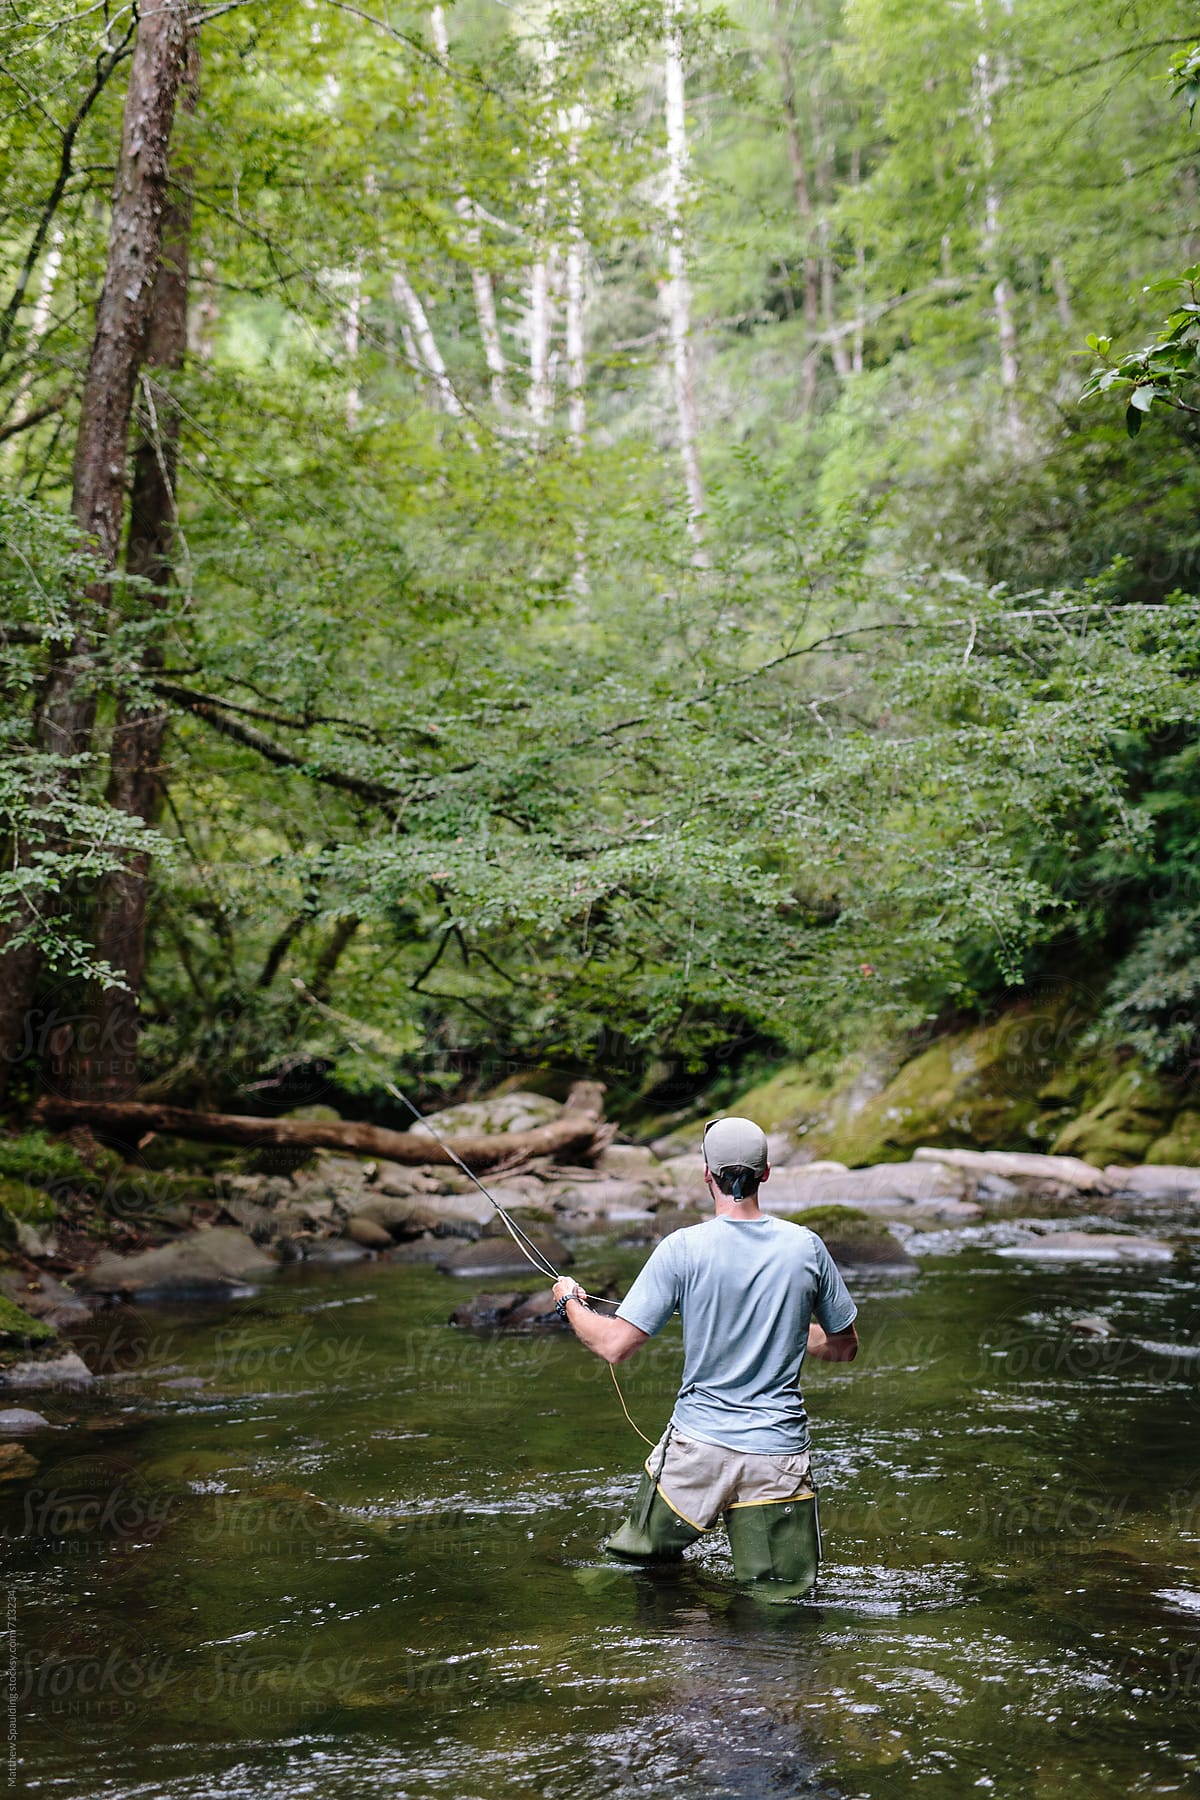 Man Fly-fishing In Clear River Trying To Catch Fish by Stocksy Contributor  Matthew Spaulding - Stocksy